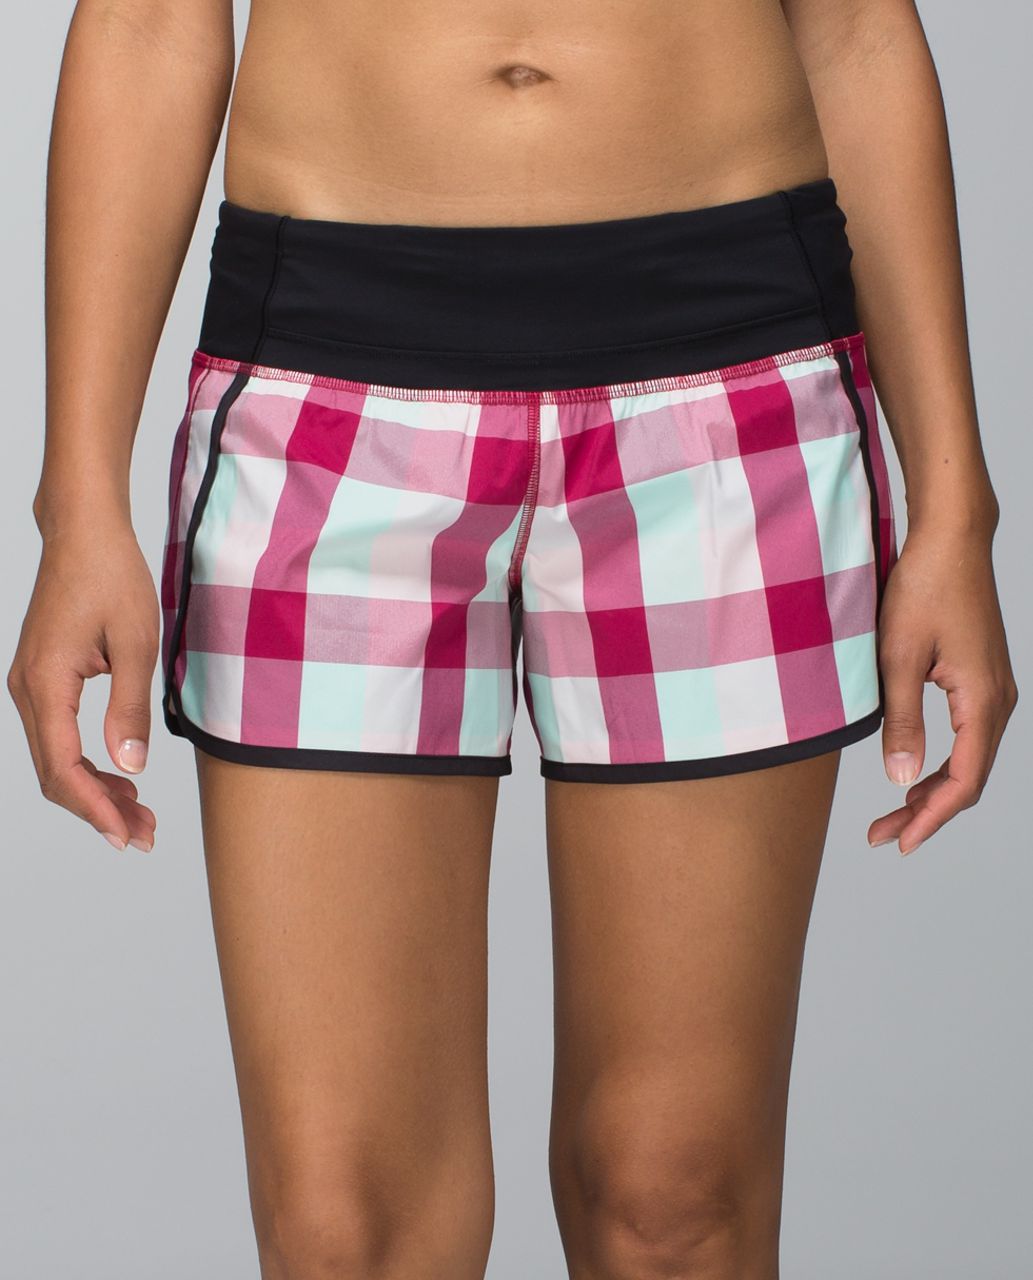 Lululemon Run Times Short *2-way stretch - Wee Wheezy Check